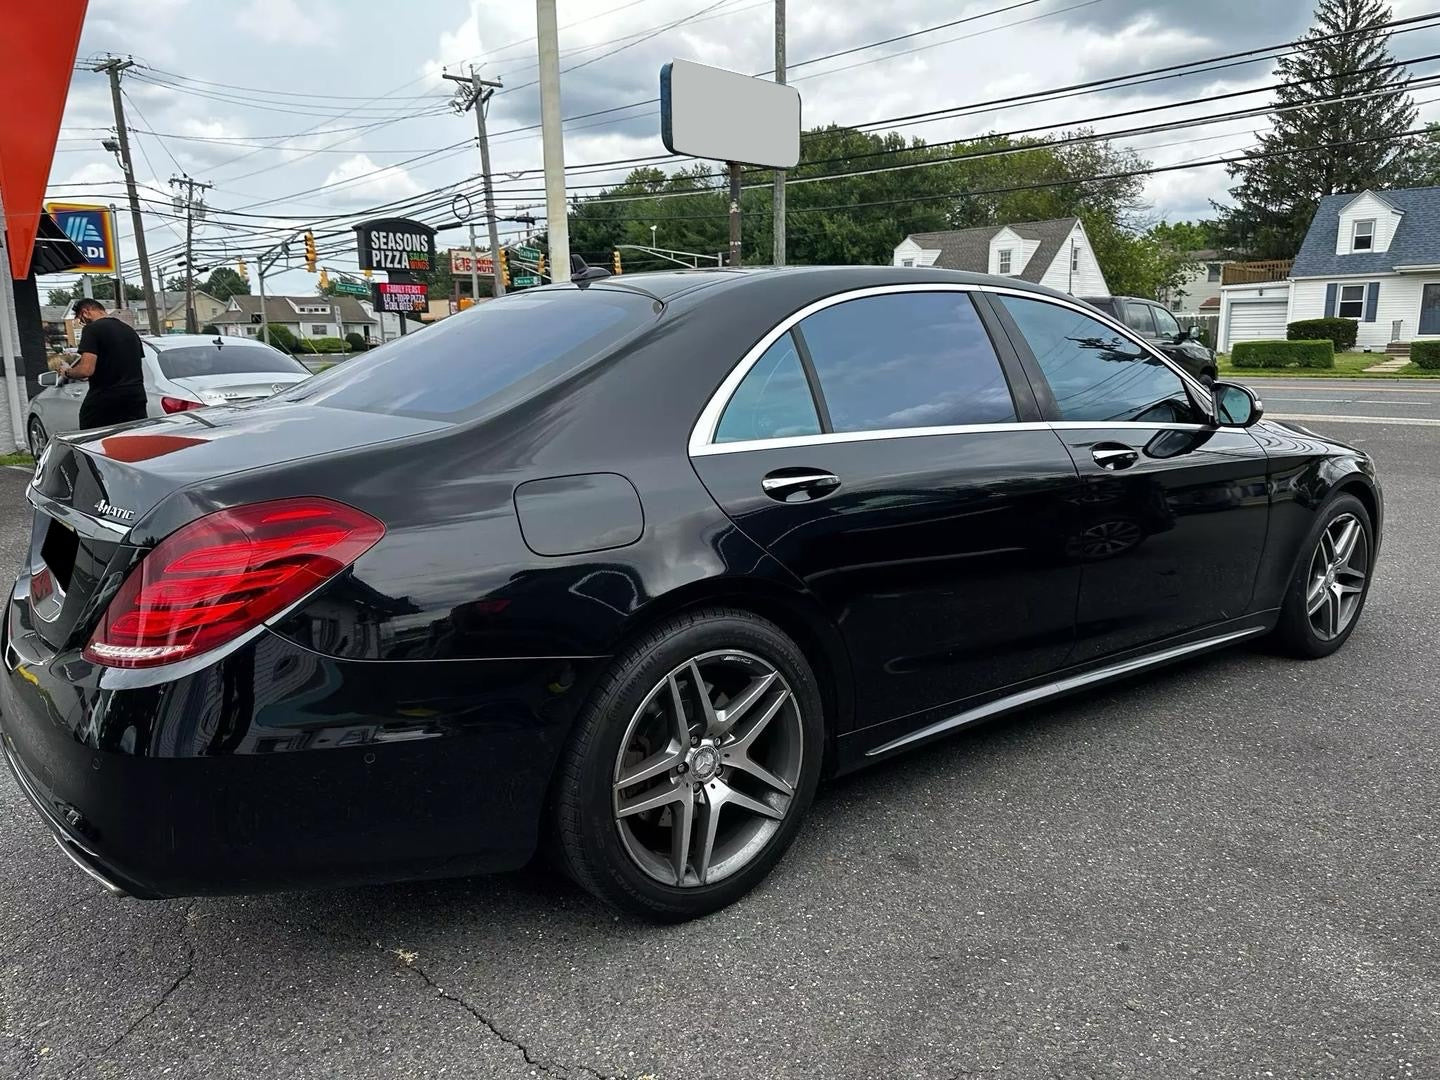 2015 MERCEDES-BENZ S-CLASS $1500 DOWN & DRIVE IN 1 HOUR!